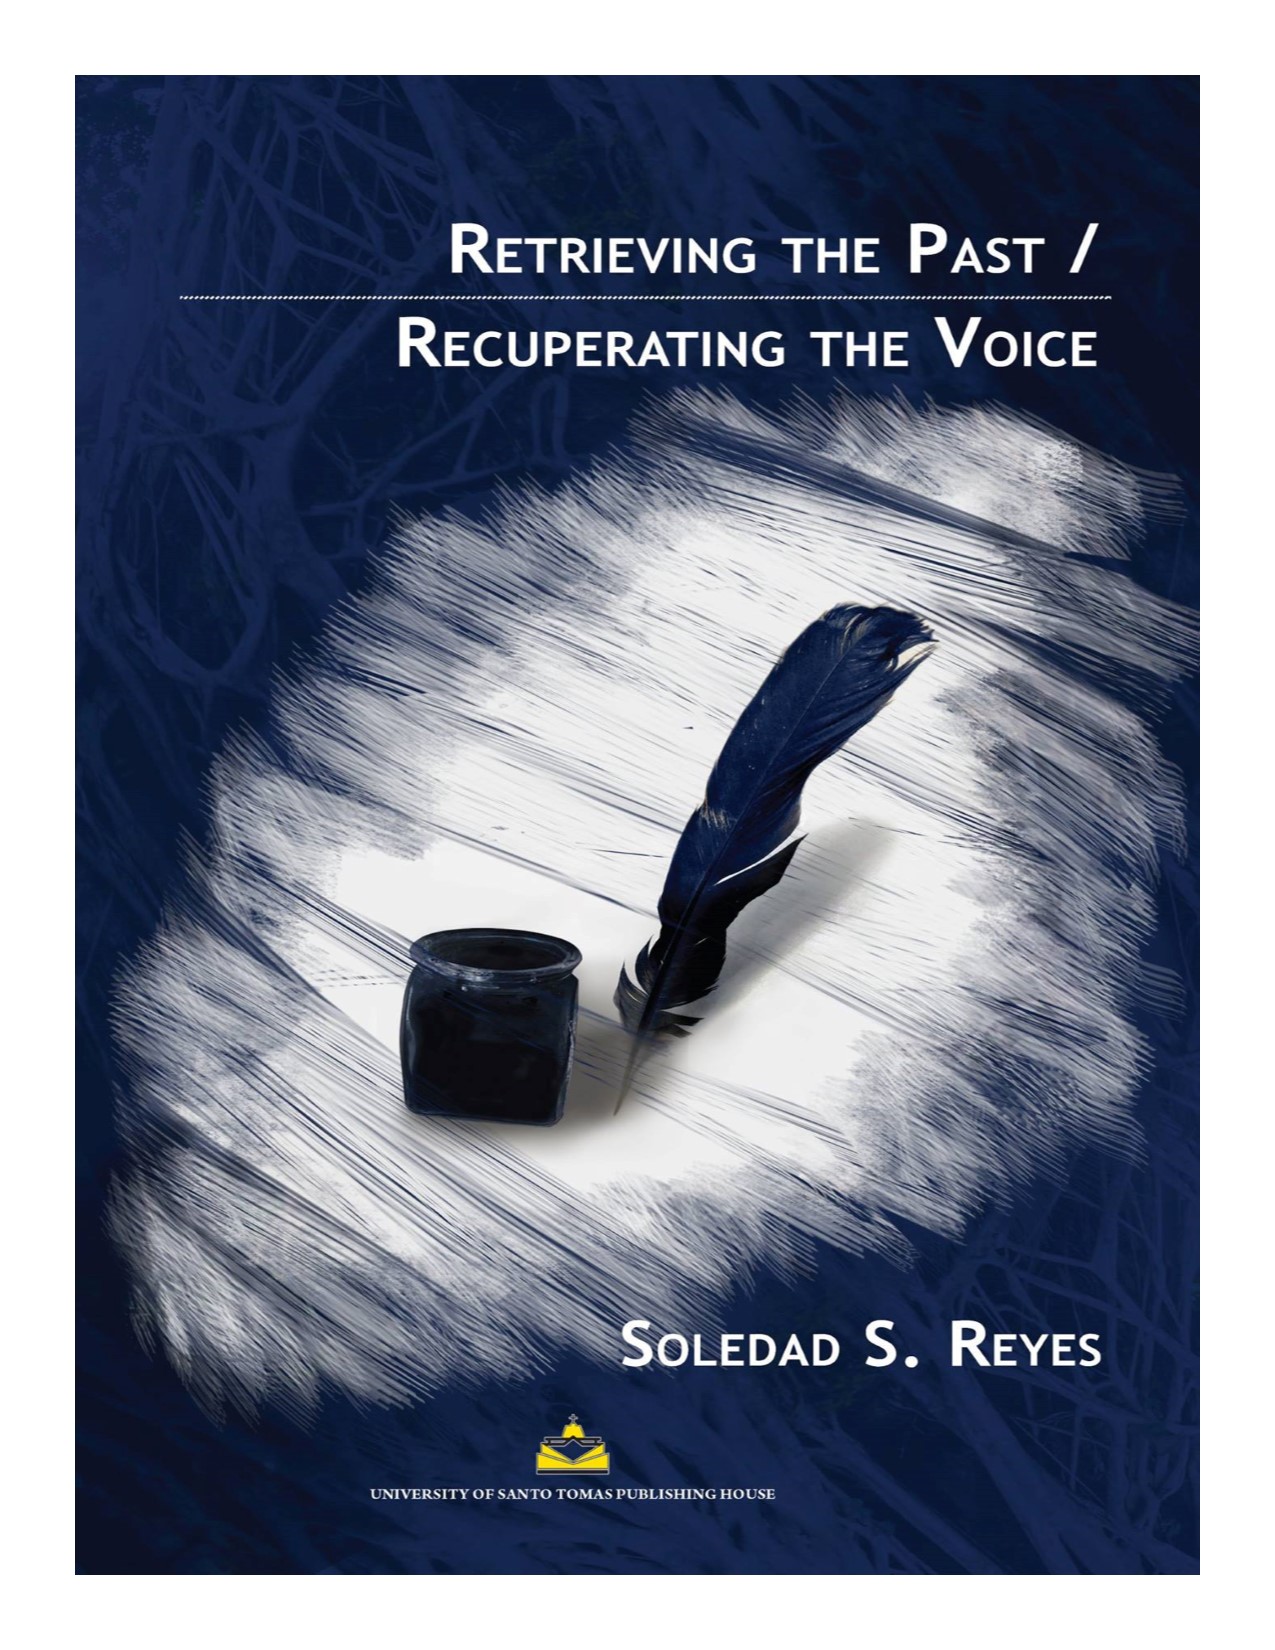 Retrieving the past, recuperating the voice